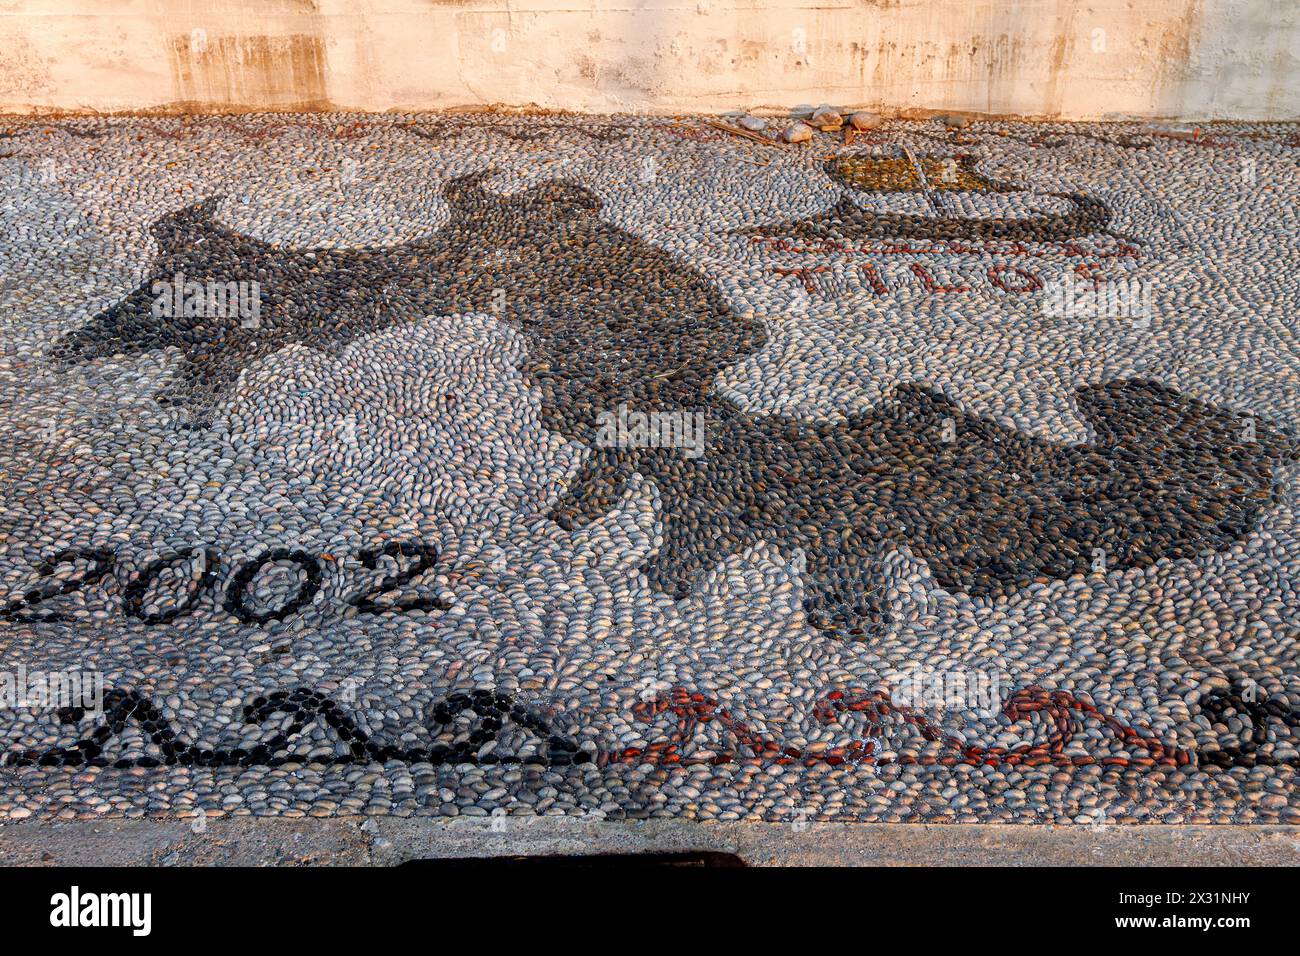 Pebble mosaic with the shape of Tilos island, the date 2002 and an ancient trireme in black pebbles, at the port of Livadia town, Tilos, Greece,Europe Stock Photo